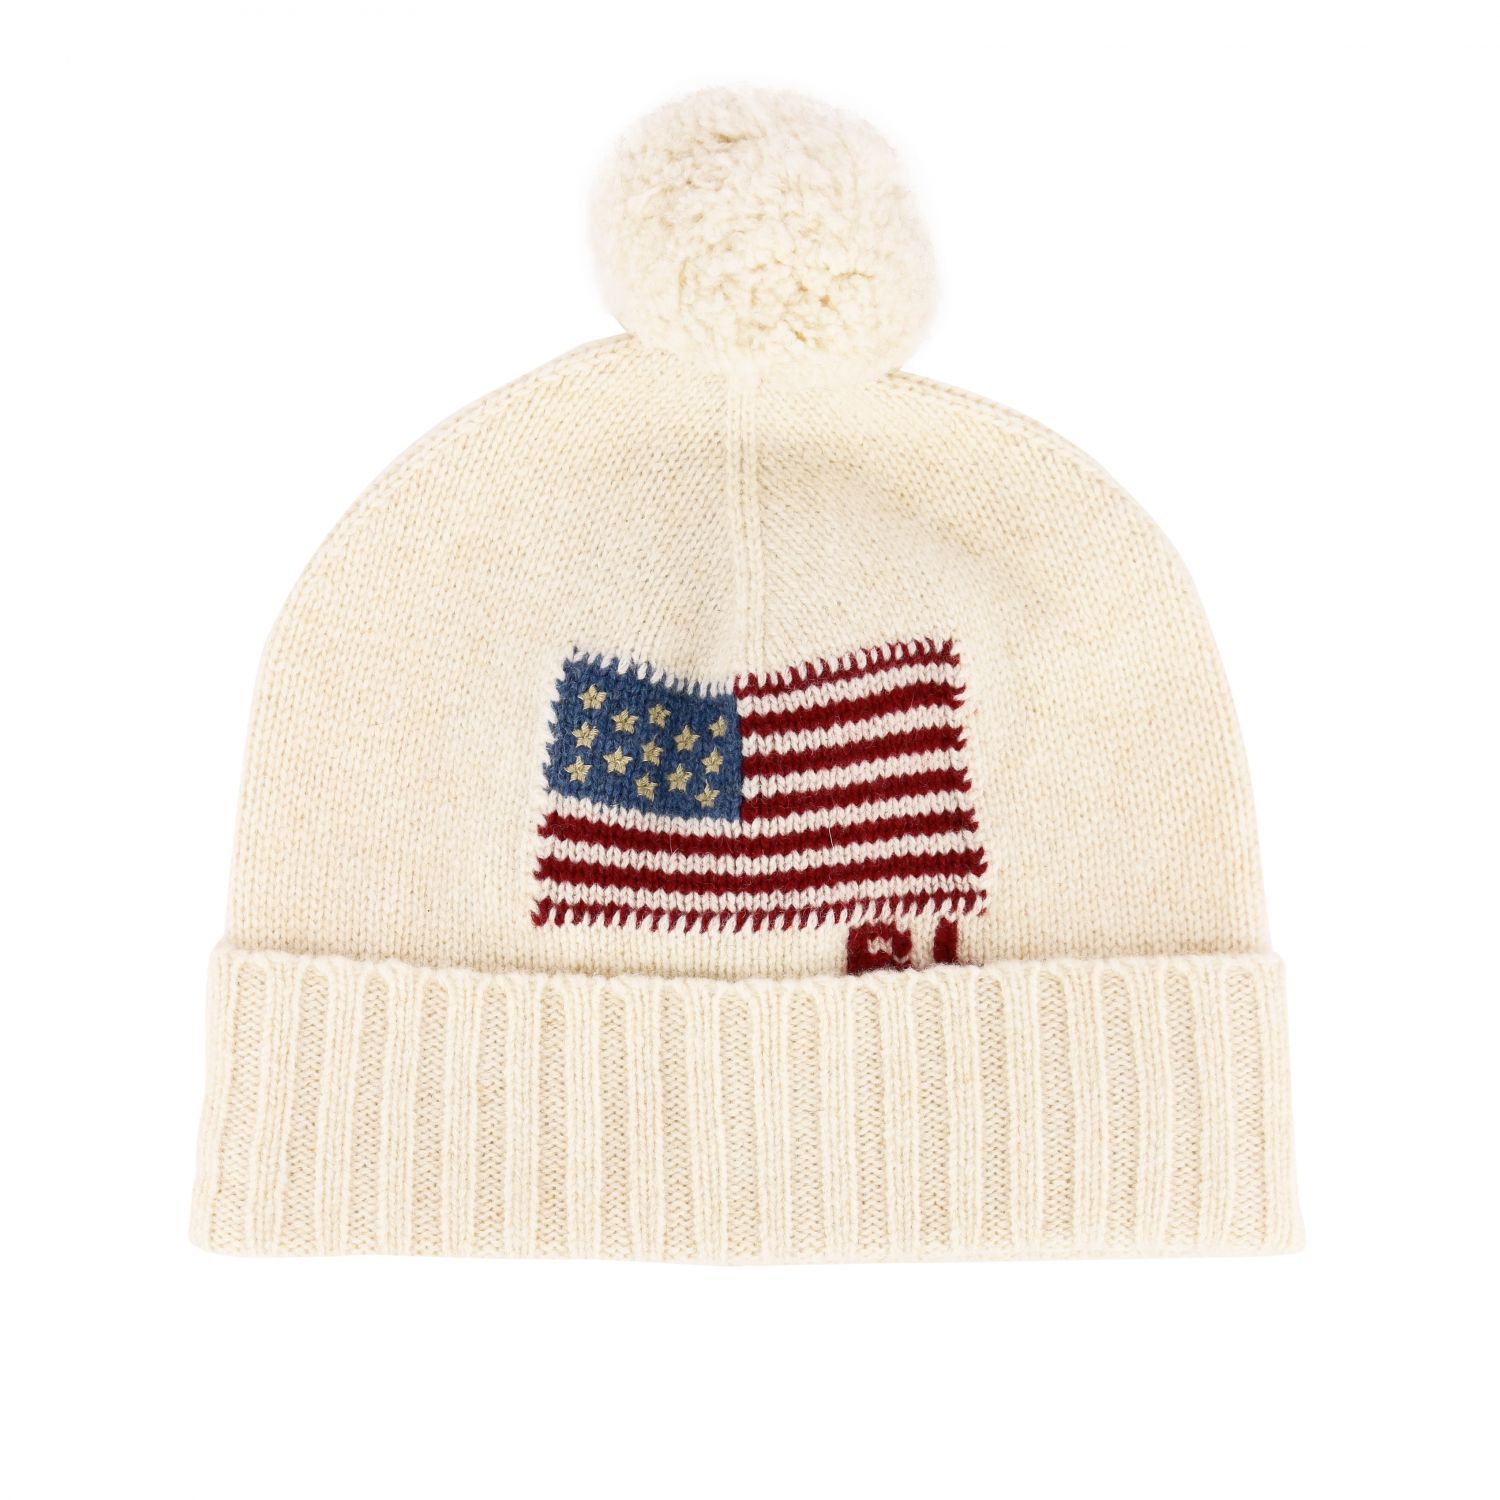 werkplaats Mars Bloemlezing Polo Ralph Lauren Outlet: hat with maxi flag and pompon | Hat Polo Ralph  Lauren Women Cream | Hat Polo Ralph Lauren 455733185 GIGLIO.COM